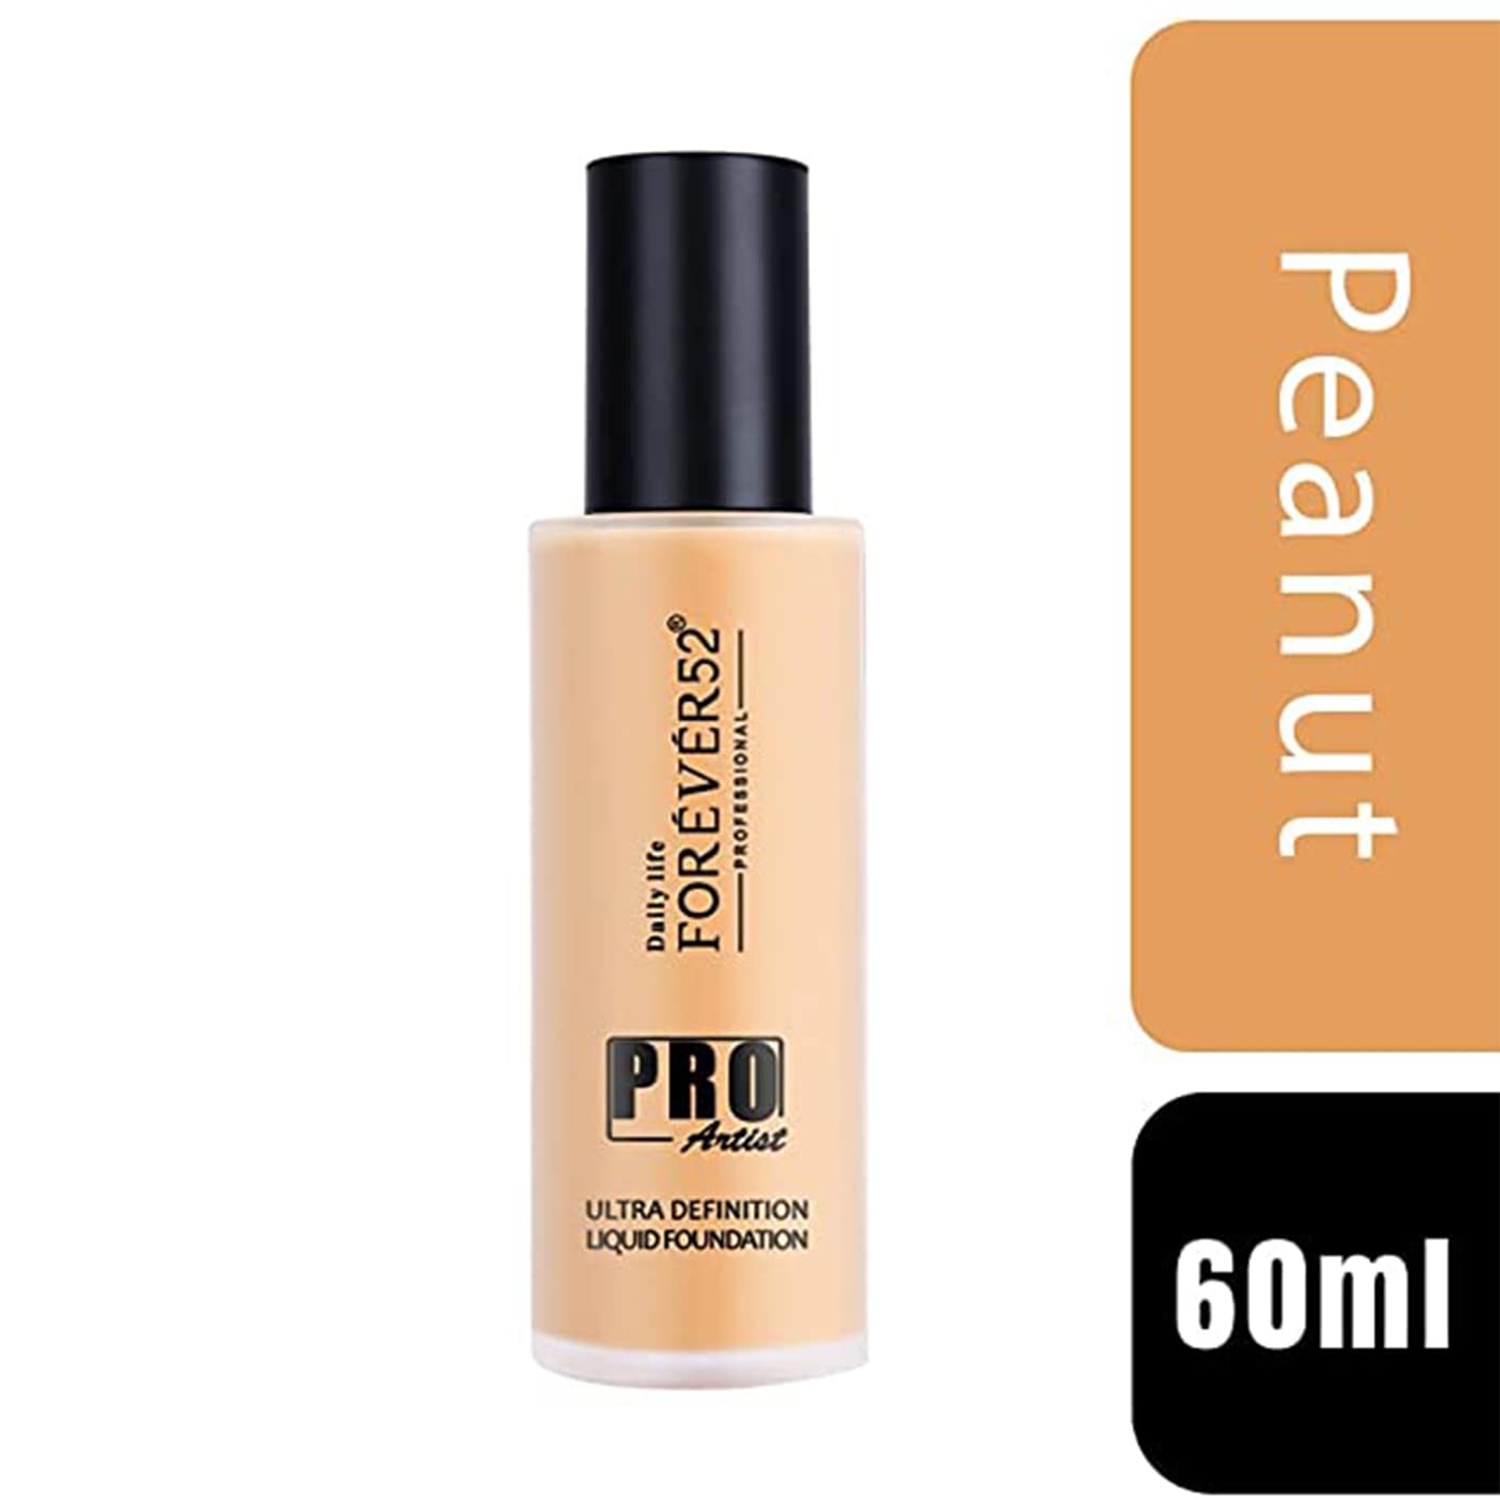 Daily Life Forever52 | Daily Life Forever52 Pro Artist Ultra Definition Liquid Foundation - Peanut (60ml)